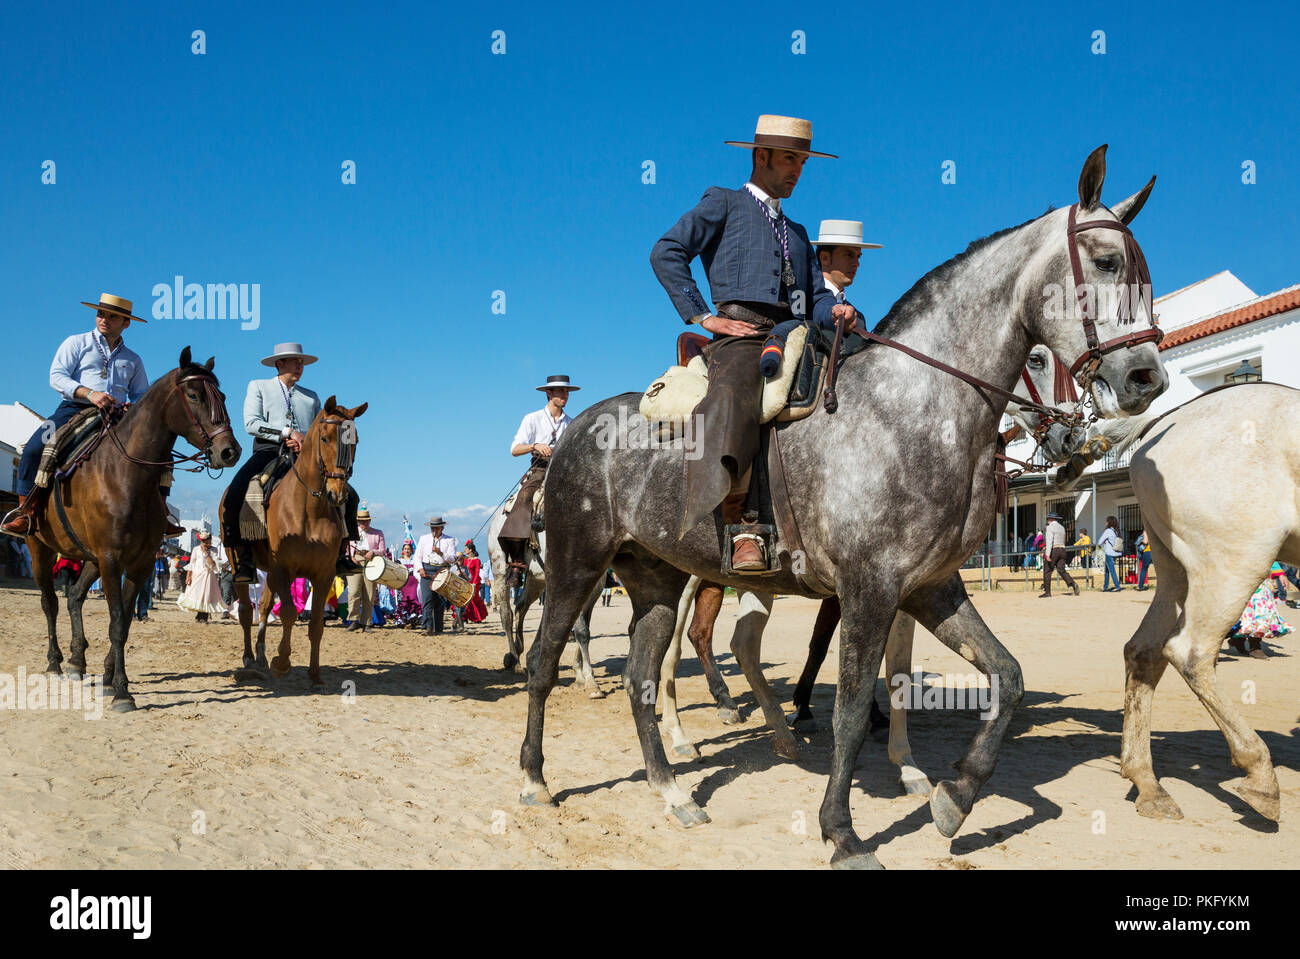 People in traditional clothes riding horses, Pentecost pilgrimage of El Rocio, Huelva province, Andalusia, Spain Stock Photo